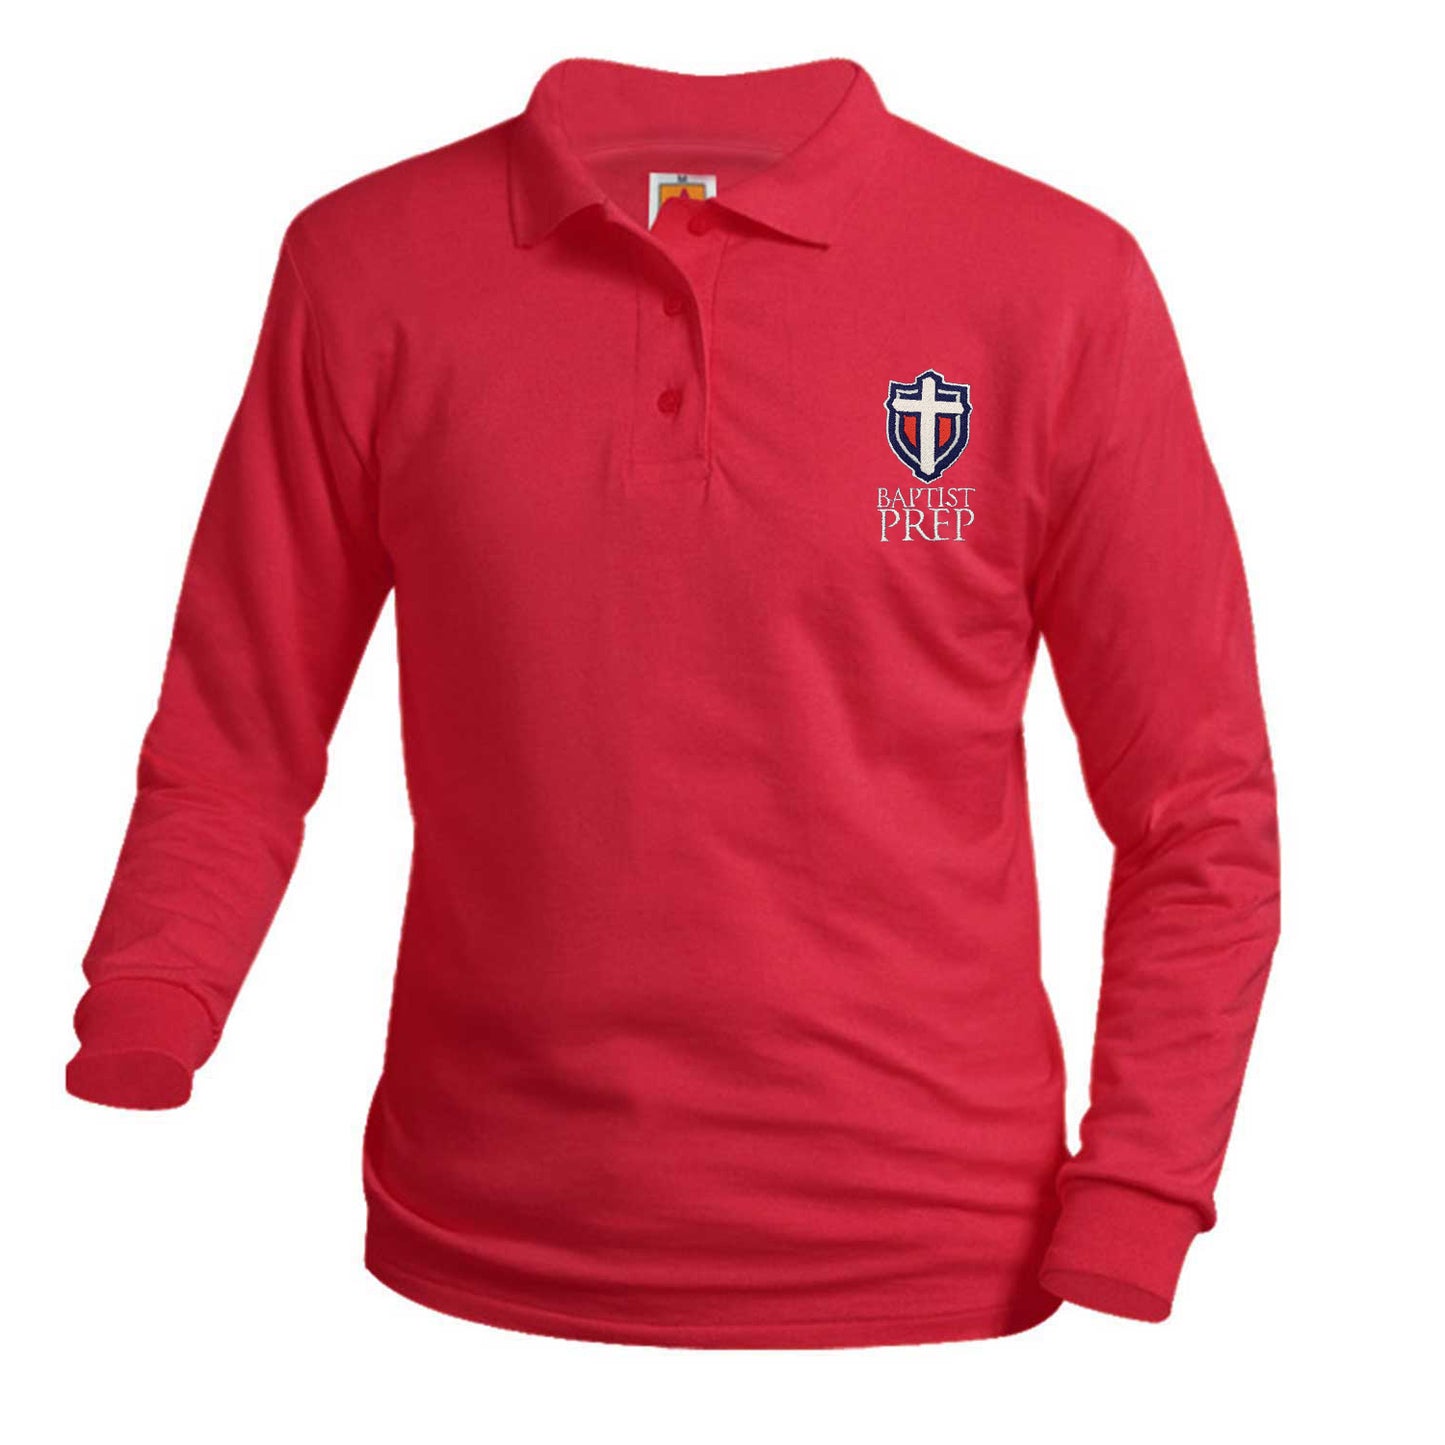 Adult Long Sleeve Smooth Polo With Baprist Prep Logo